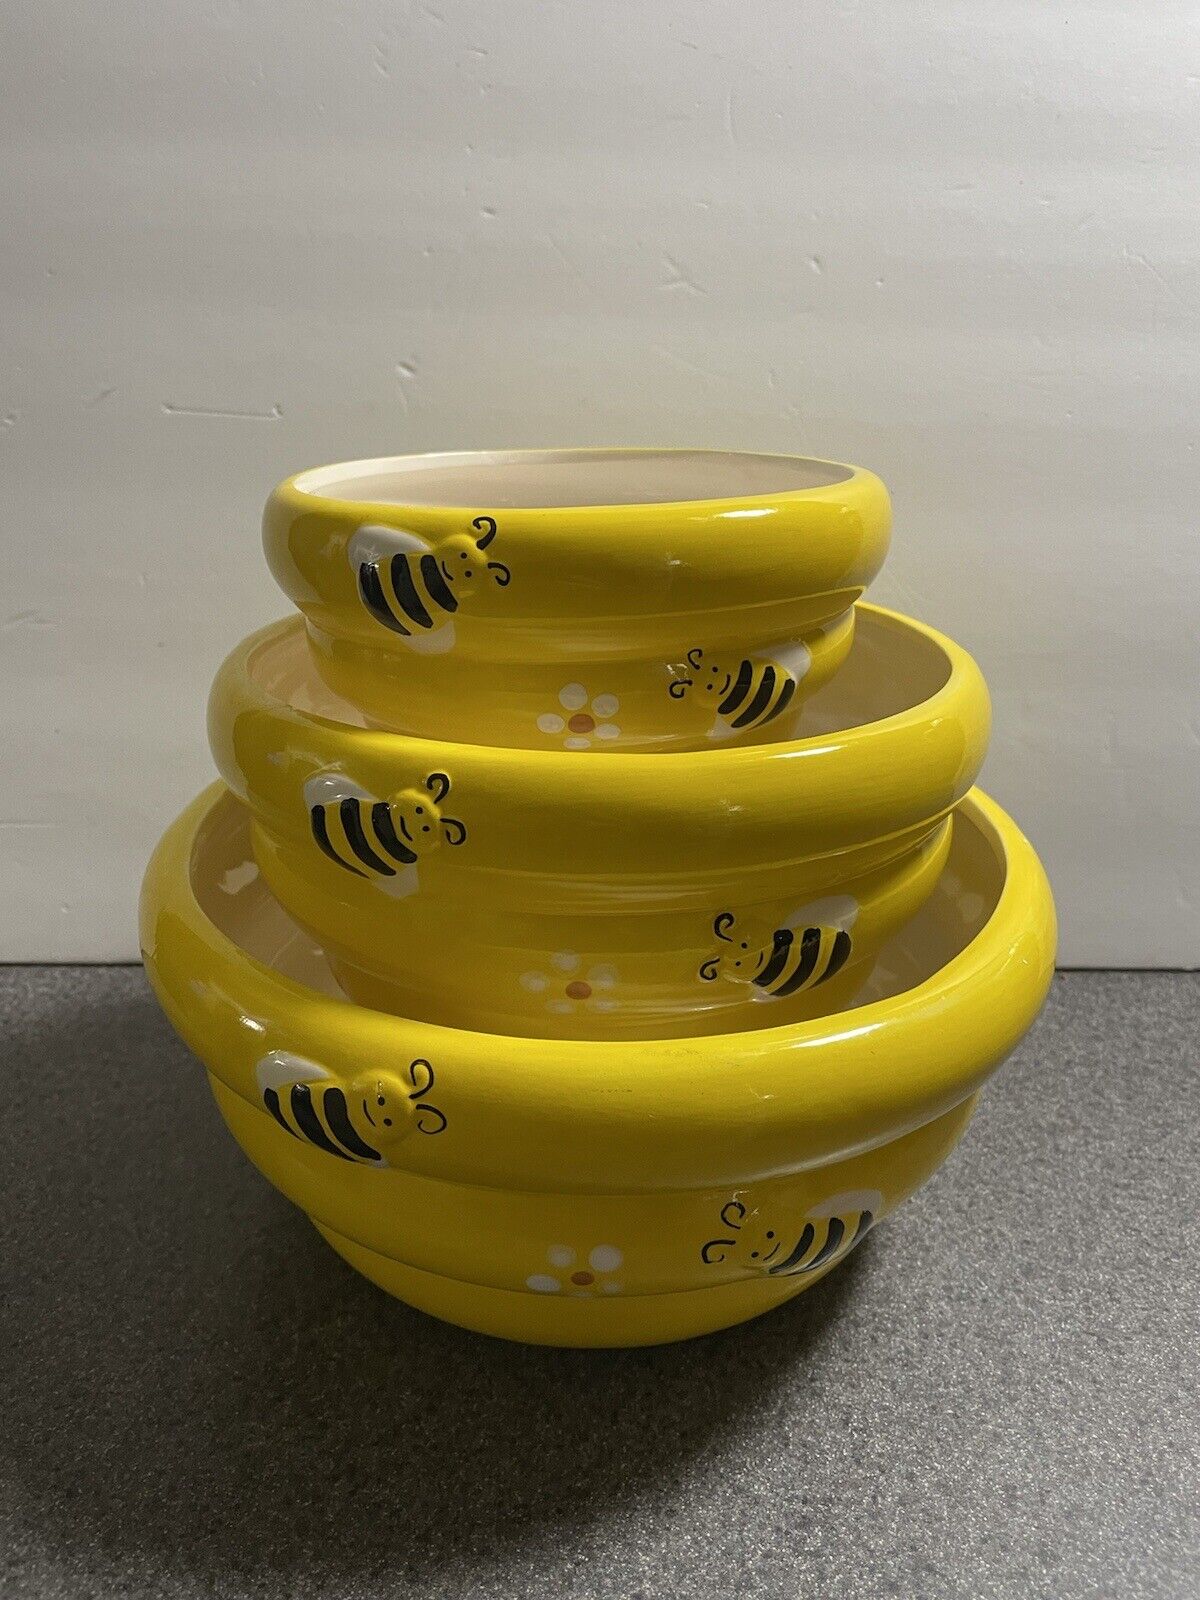 Discontinued Avon Busy Bee Mixing Bowl Set of 3 